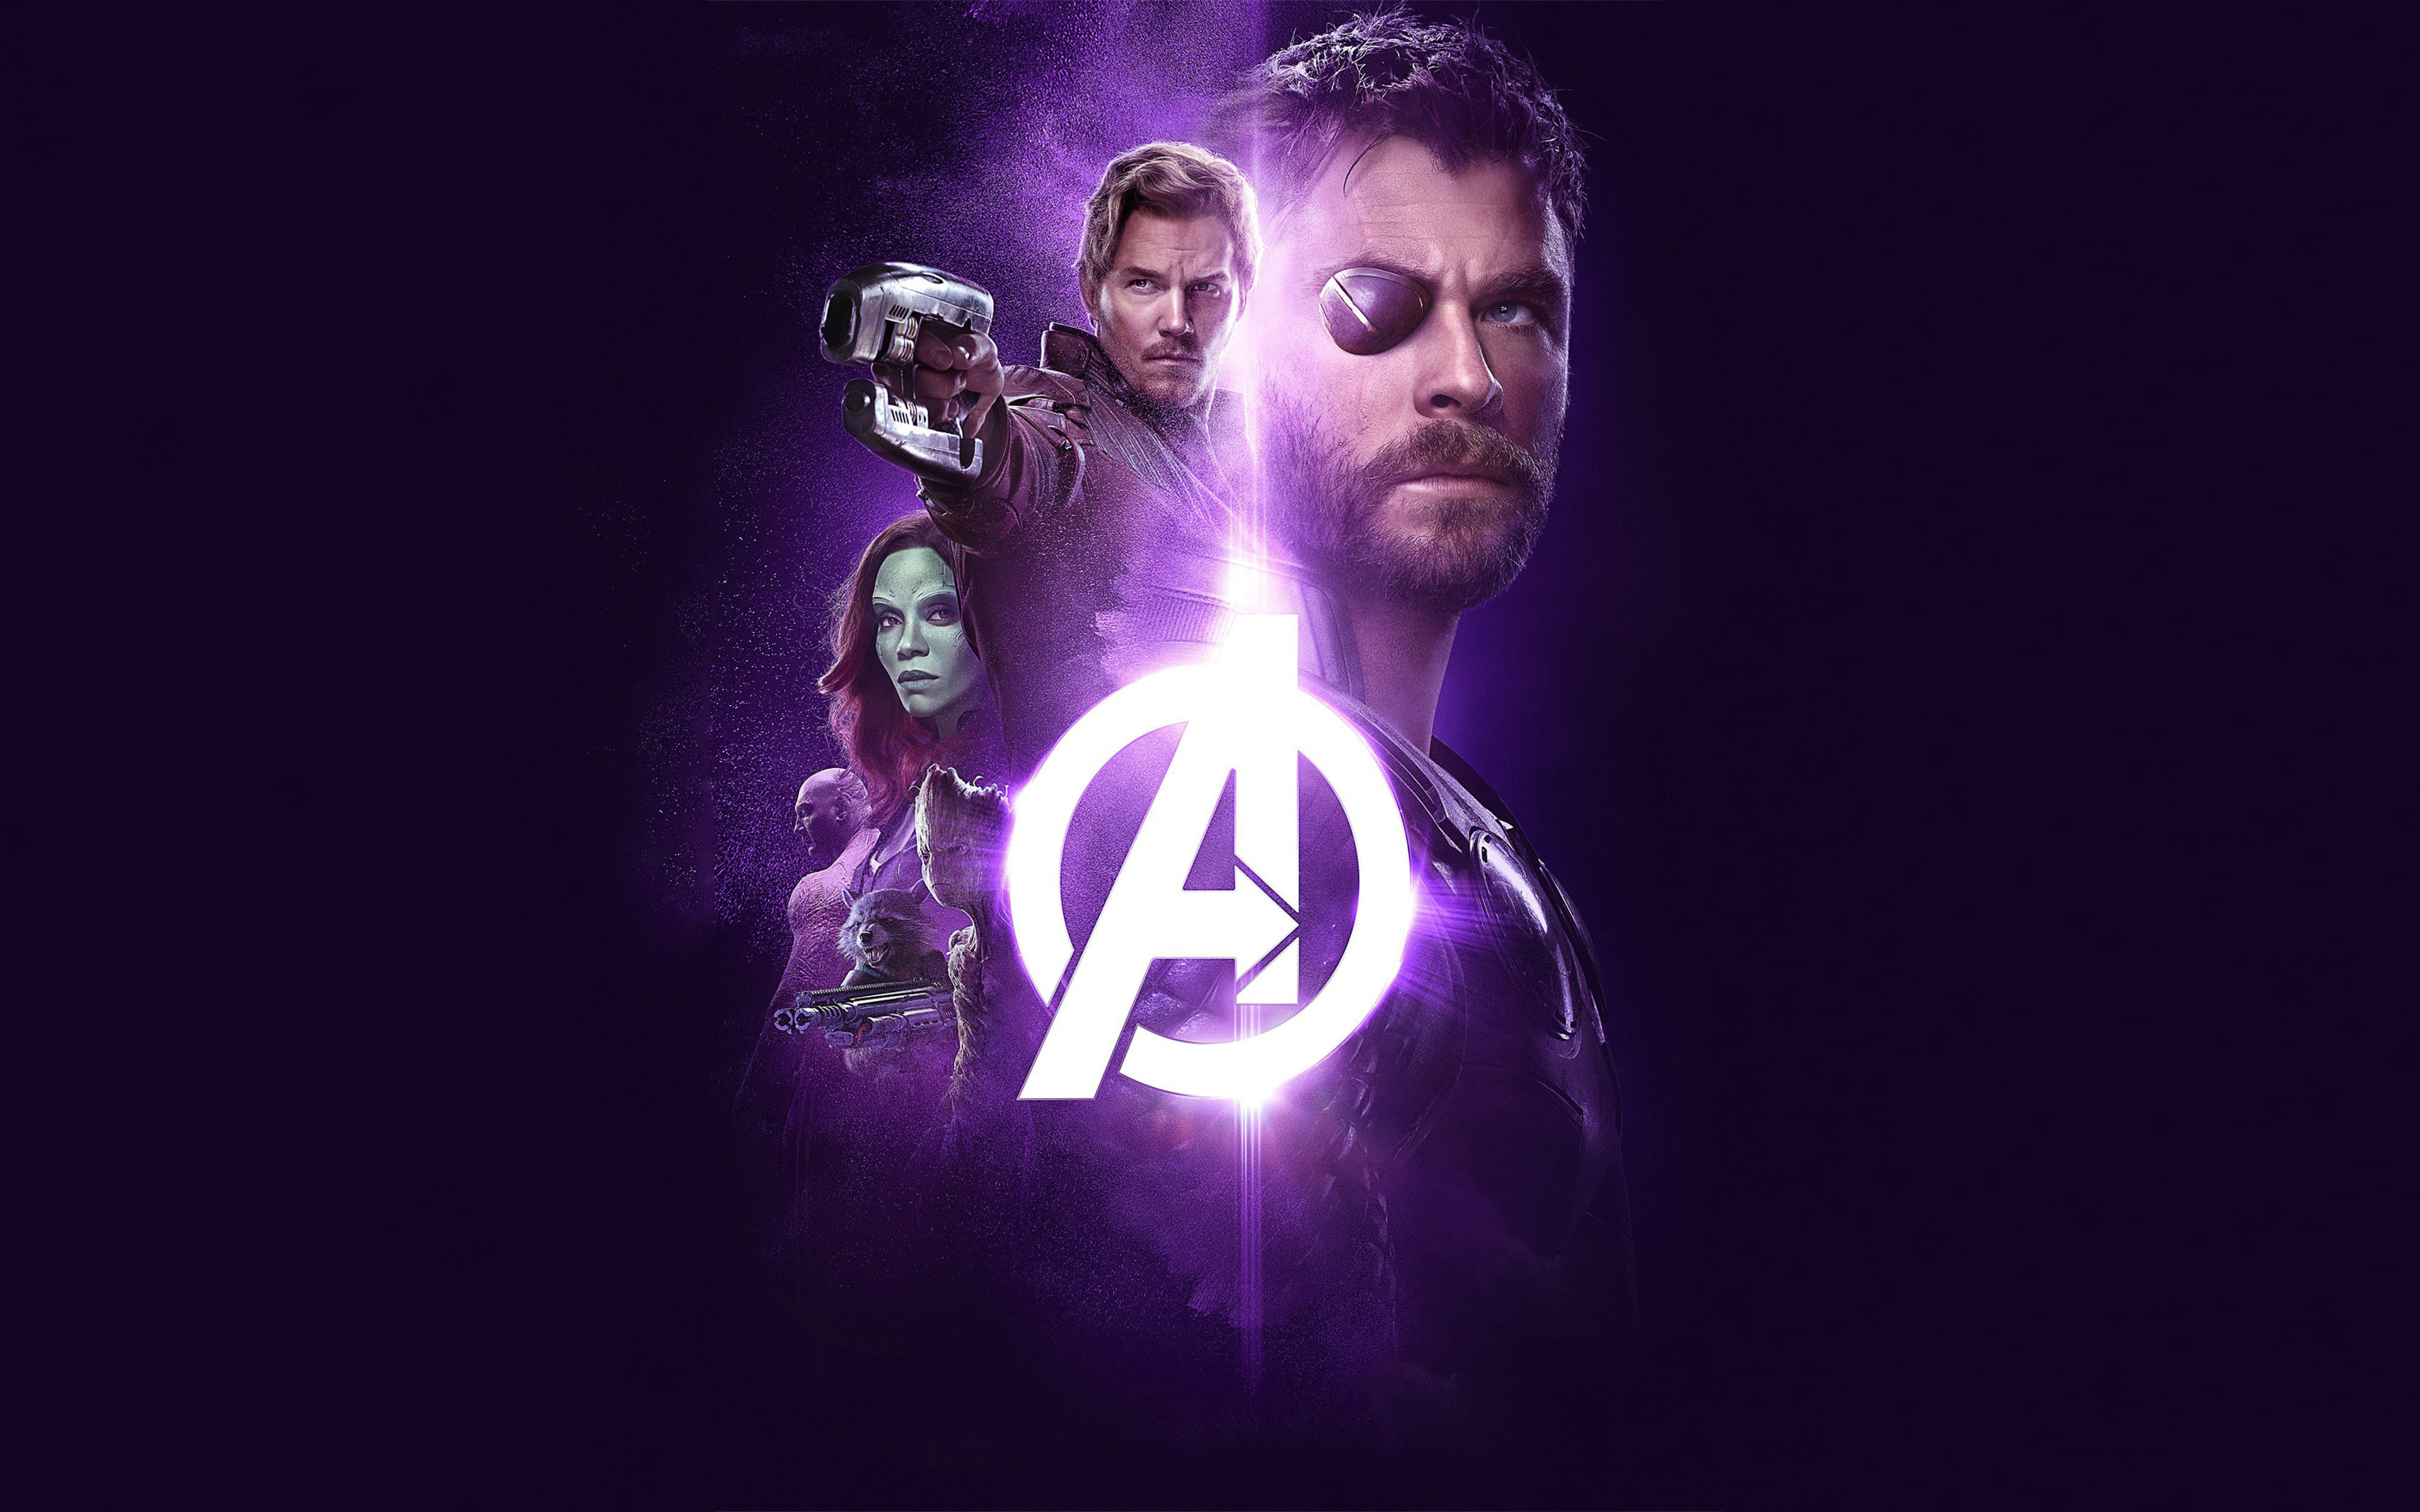 Avengers Infinity War 2018 Time Stone Poster Wallpapers